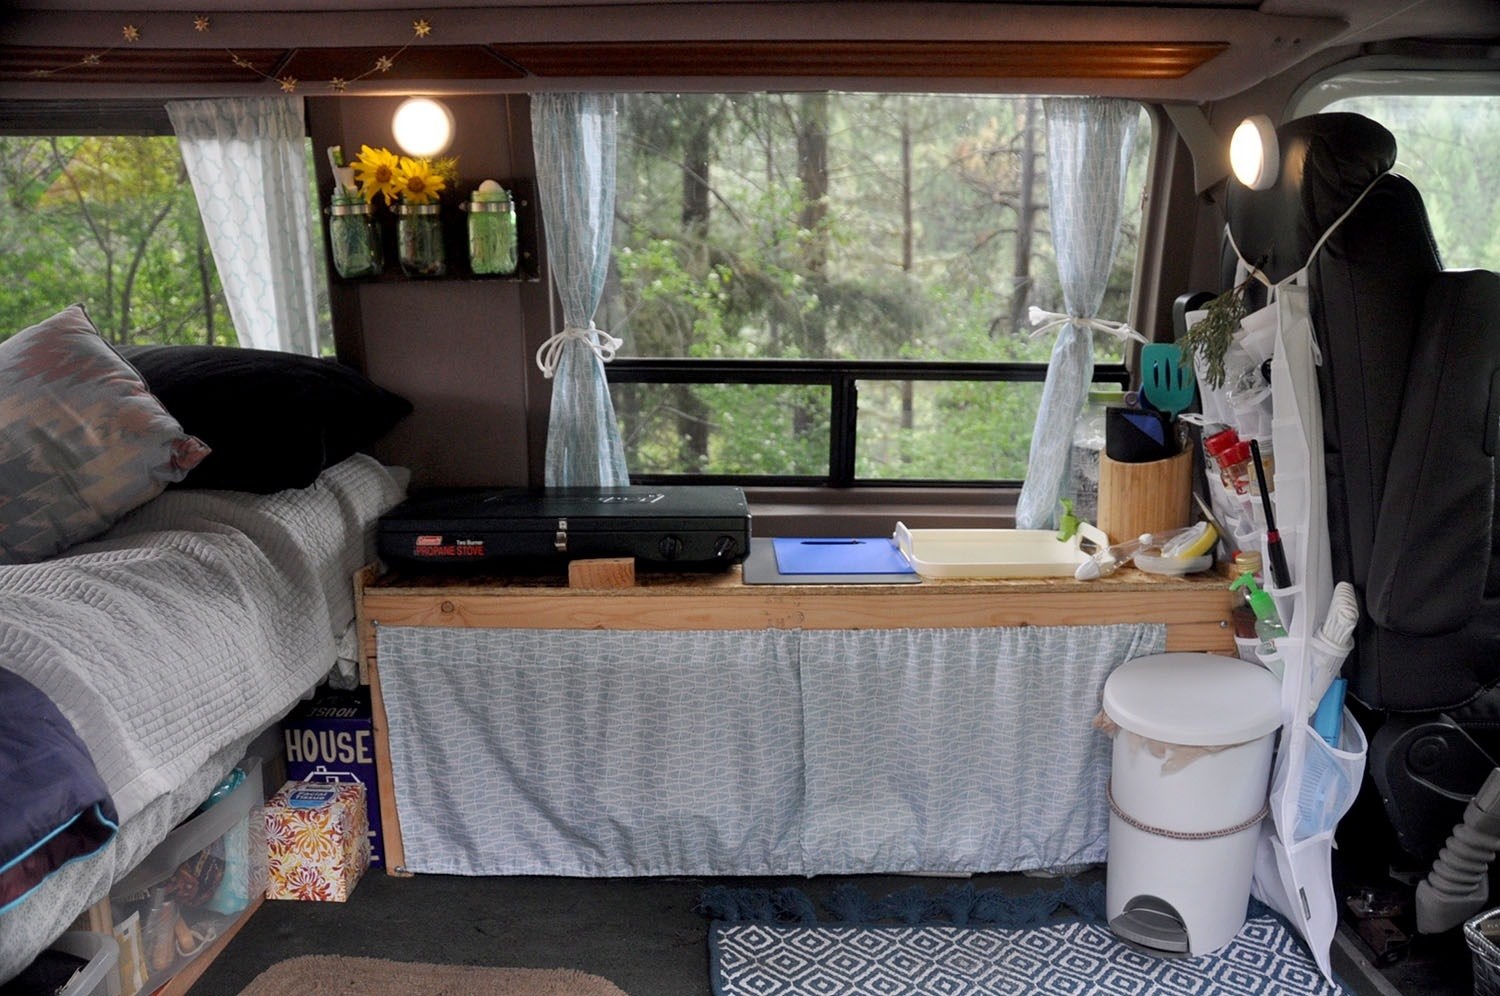 DIY Campervan Conversion on a Tiny Budget in Less Than 1 Week